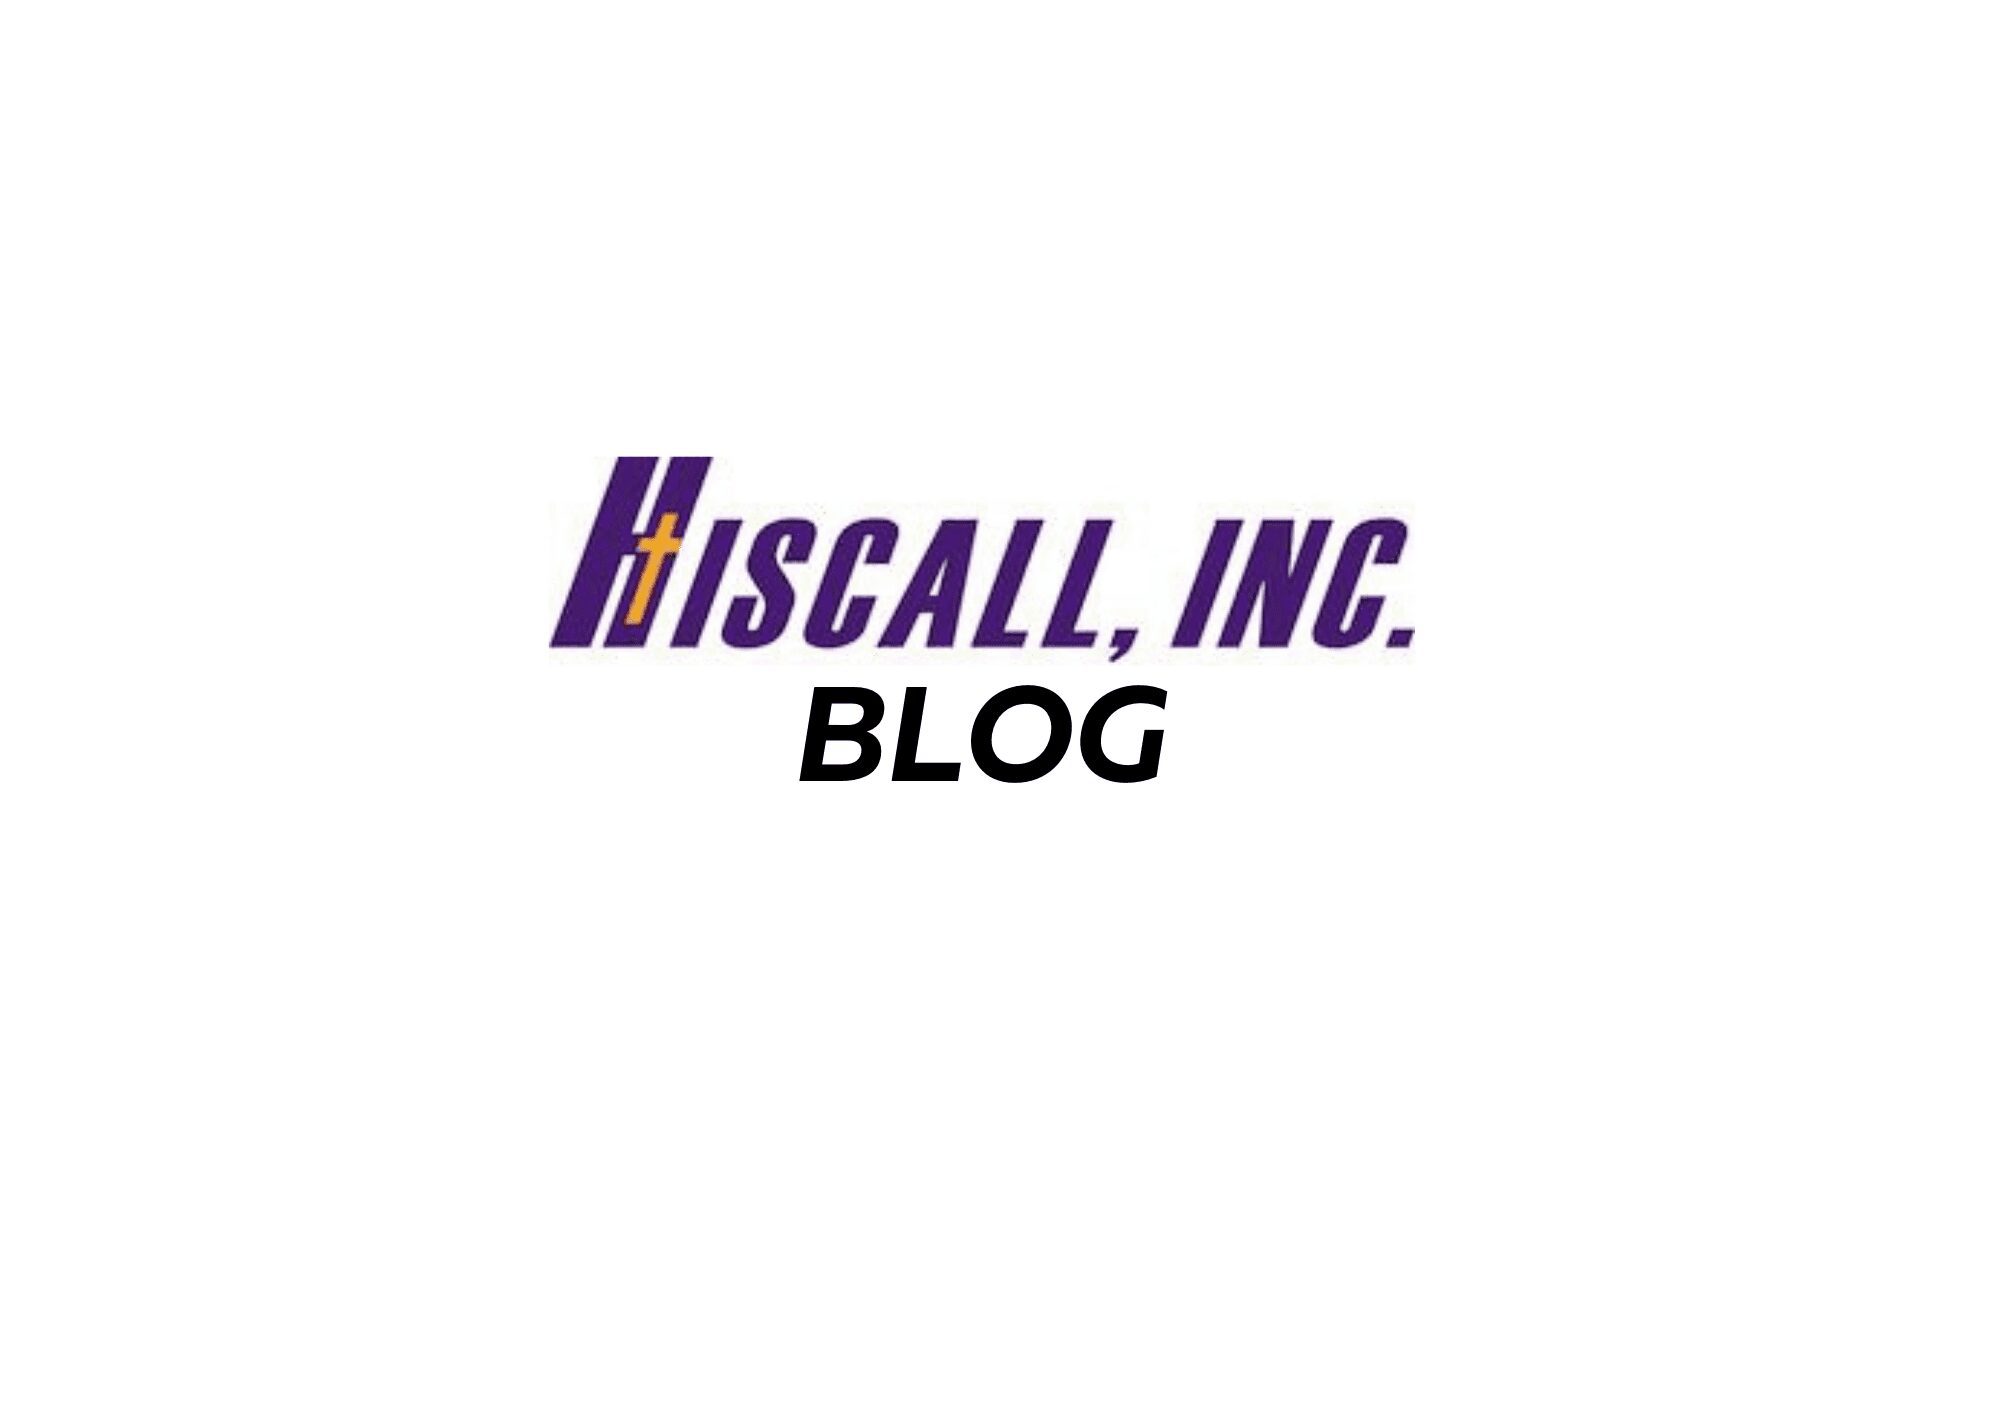 5th Annual Hiscall Technology Showcase – Join Hiscall Inc. September 17th, 2013 Nashville TN